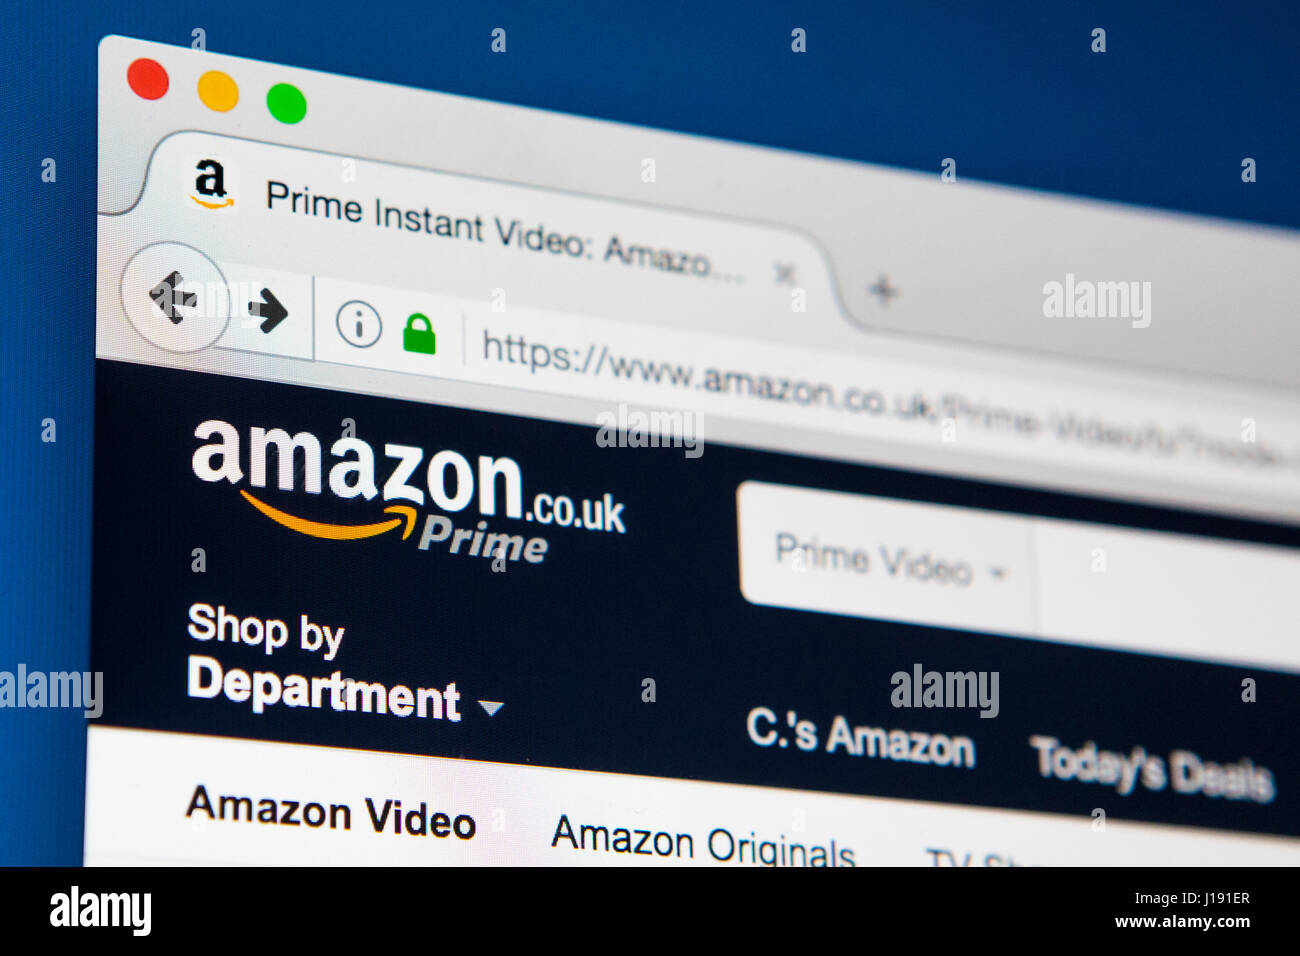 Amazon Uk Website High Resolution Stock Photography and Images - Alamy